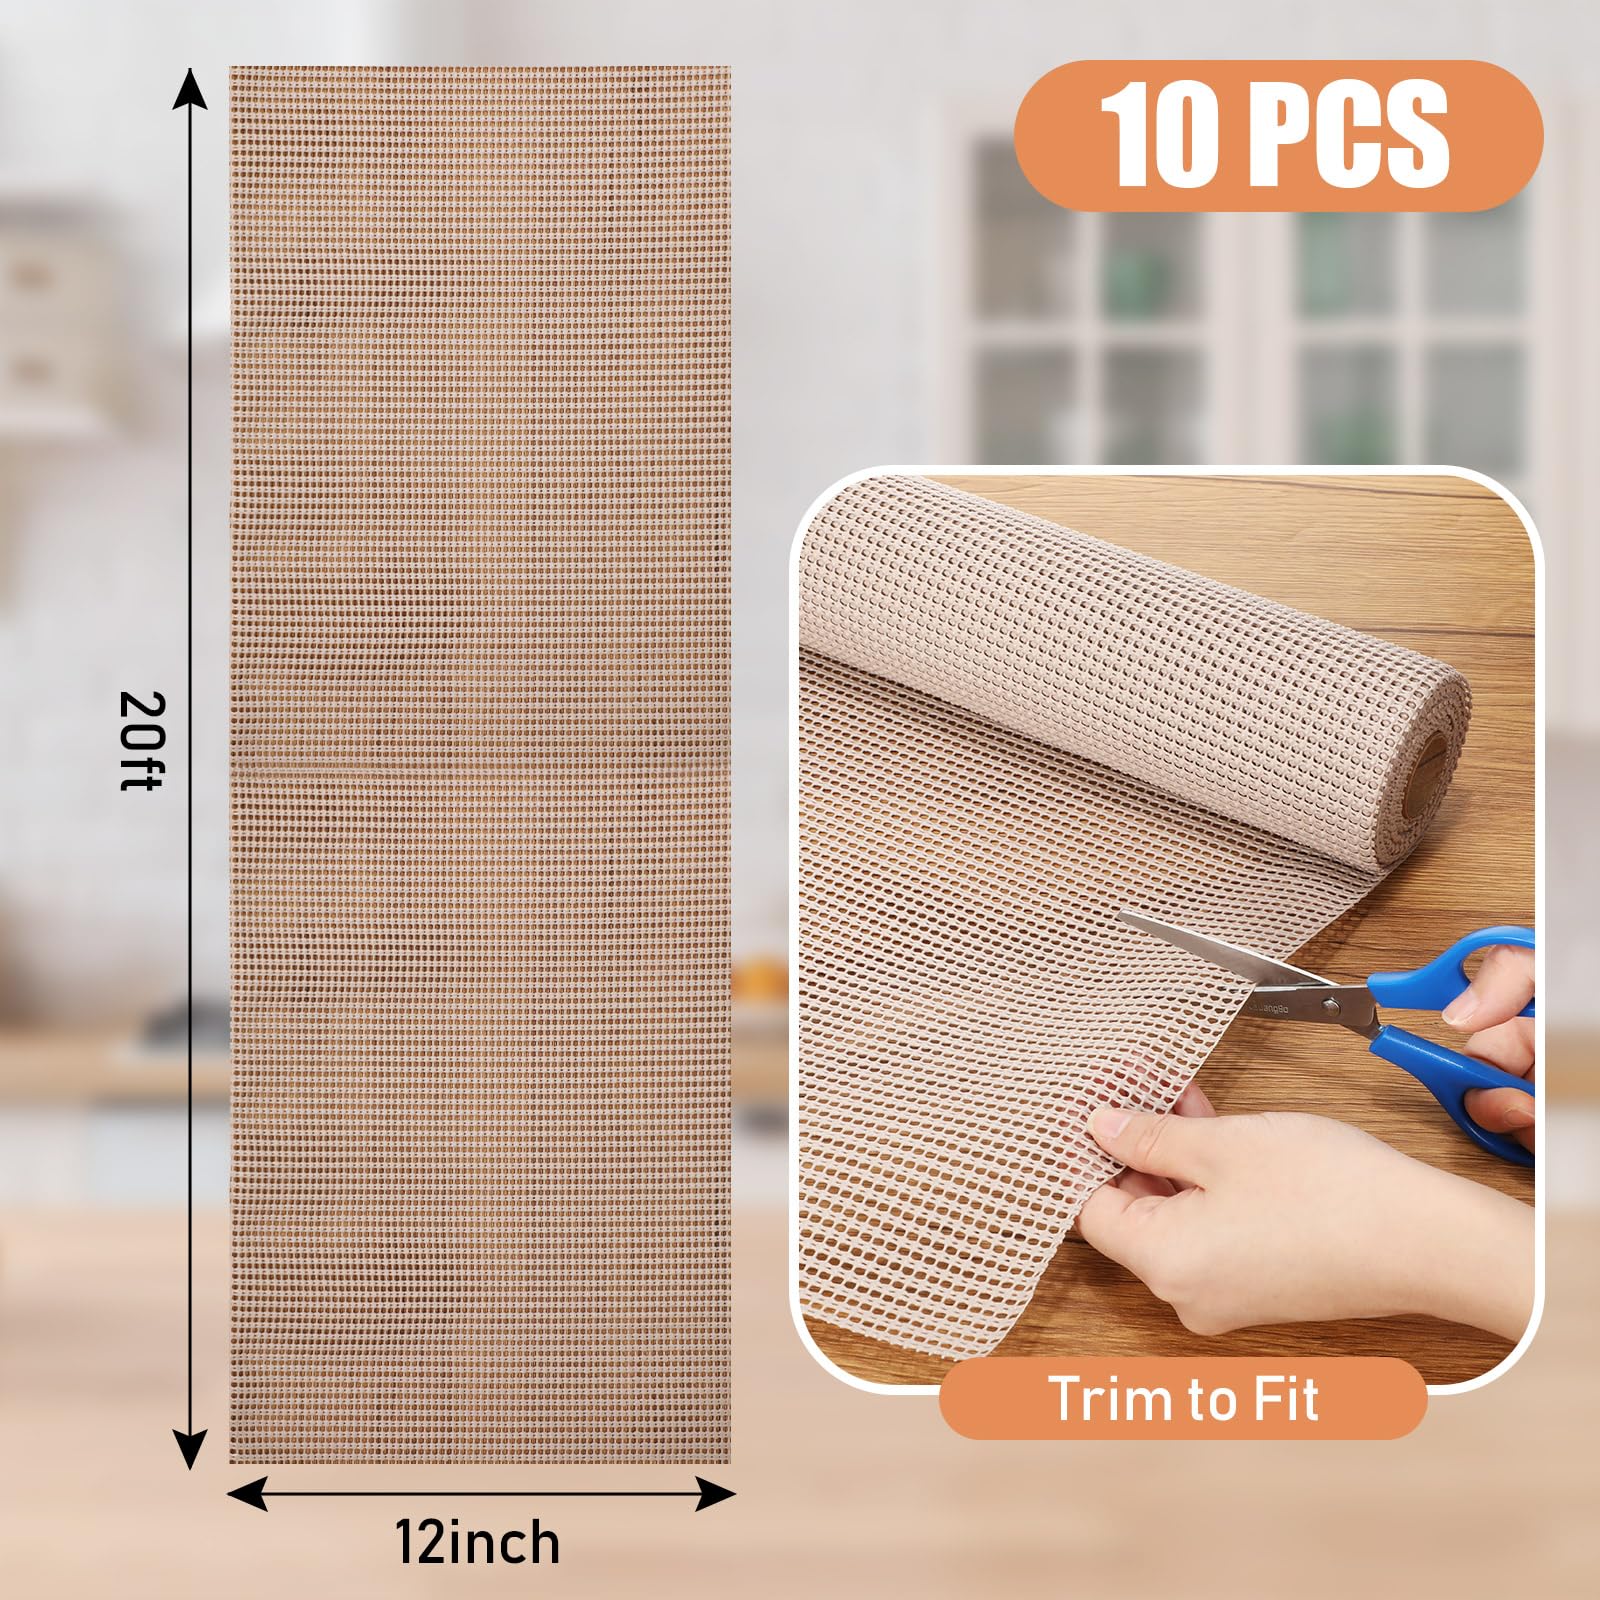 Frienda 10 Pcs Shelf Liner Kitchen Cabinet Liners 12 in x 20 ft Non Adhesive Cabinet Liners for Kitchen Shelves Cabinets Cupboards Bathroom Organization Drawers, Taupe